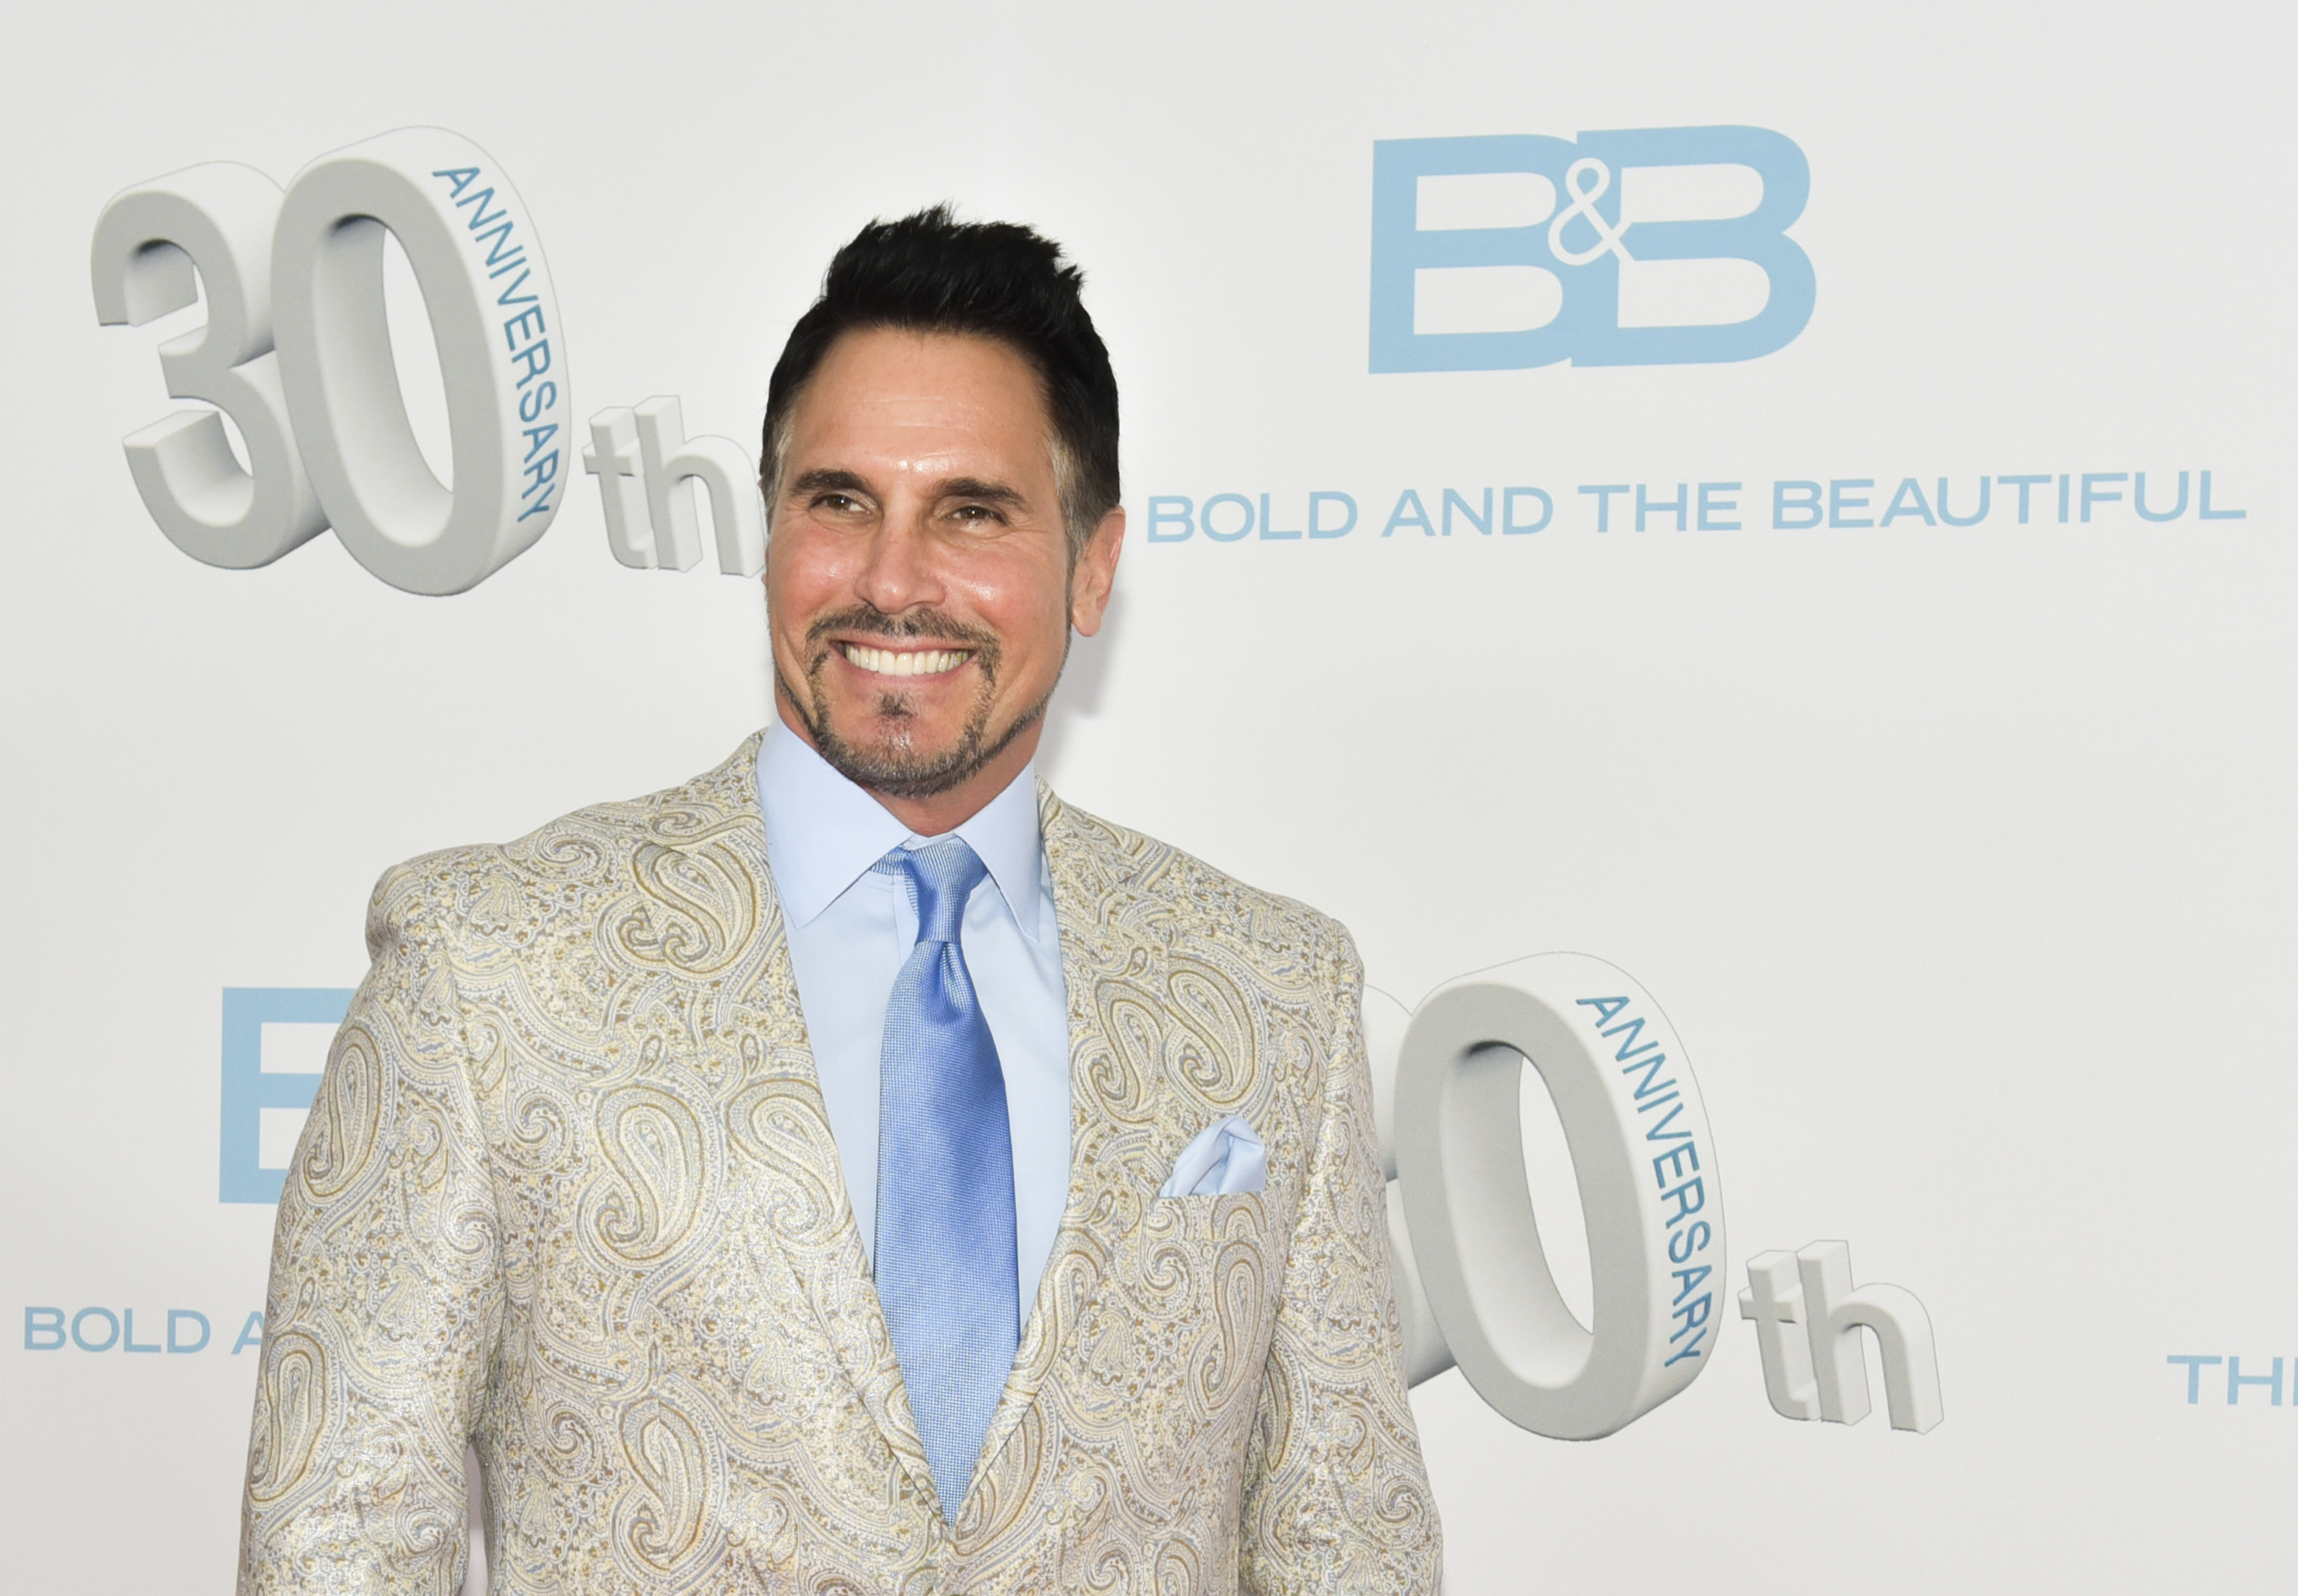 'The Bold and the Beautiful' actor Don Diamont wearing a grey suit, white shirt, and blue tie.